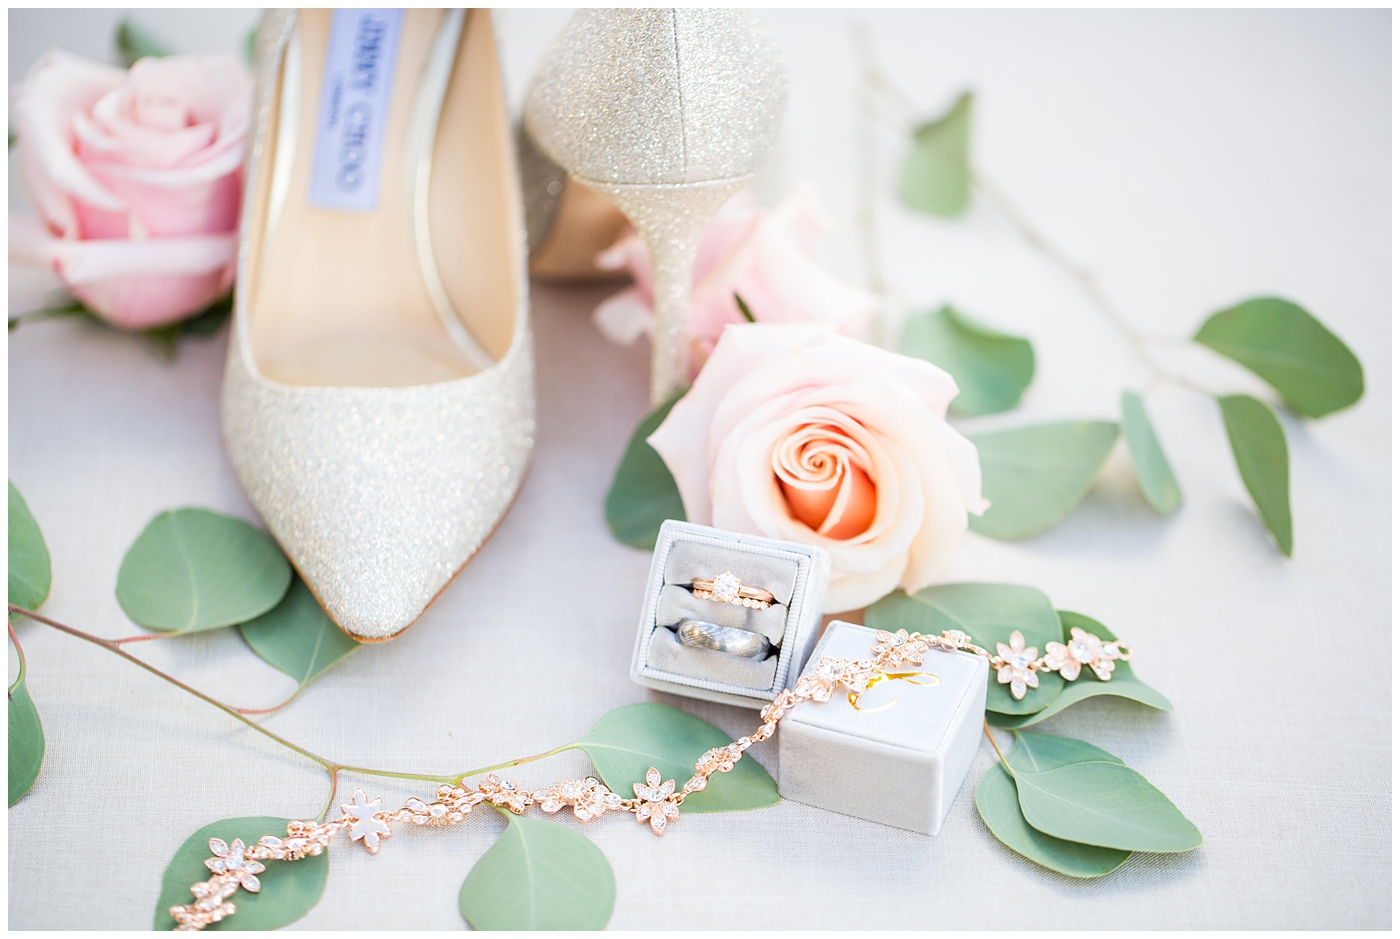 shiny gold jimmy choo wedding day shoes with rose gold wedding bands and silver ring in gray mrs. box on wedding day details